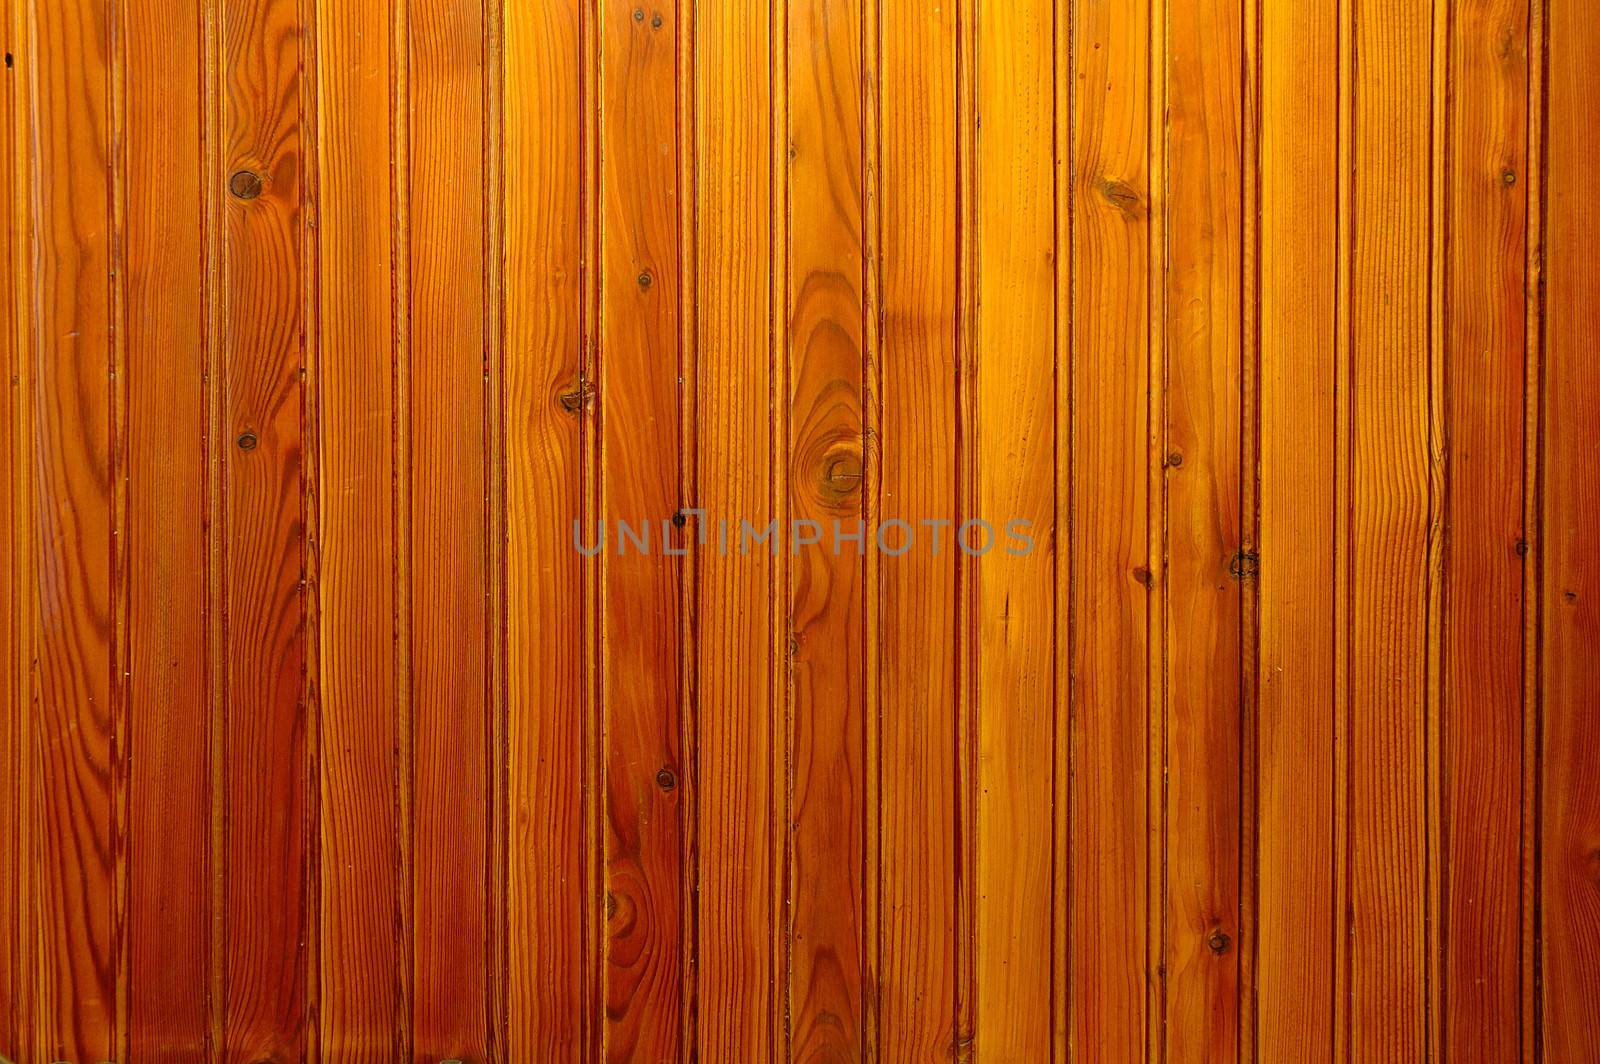 Wall covered with wainscot